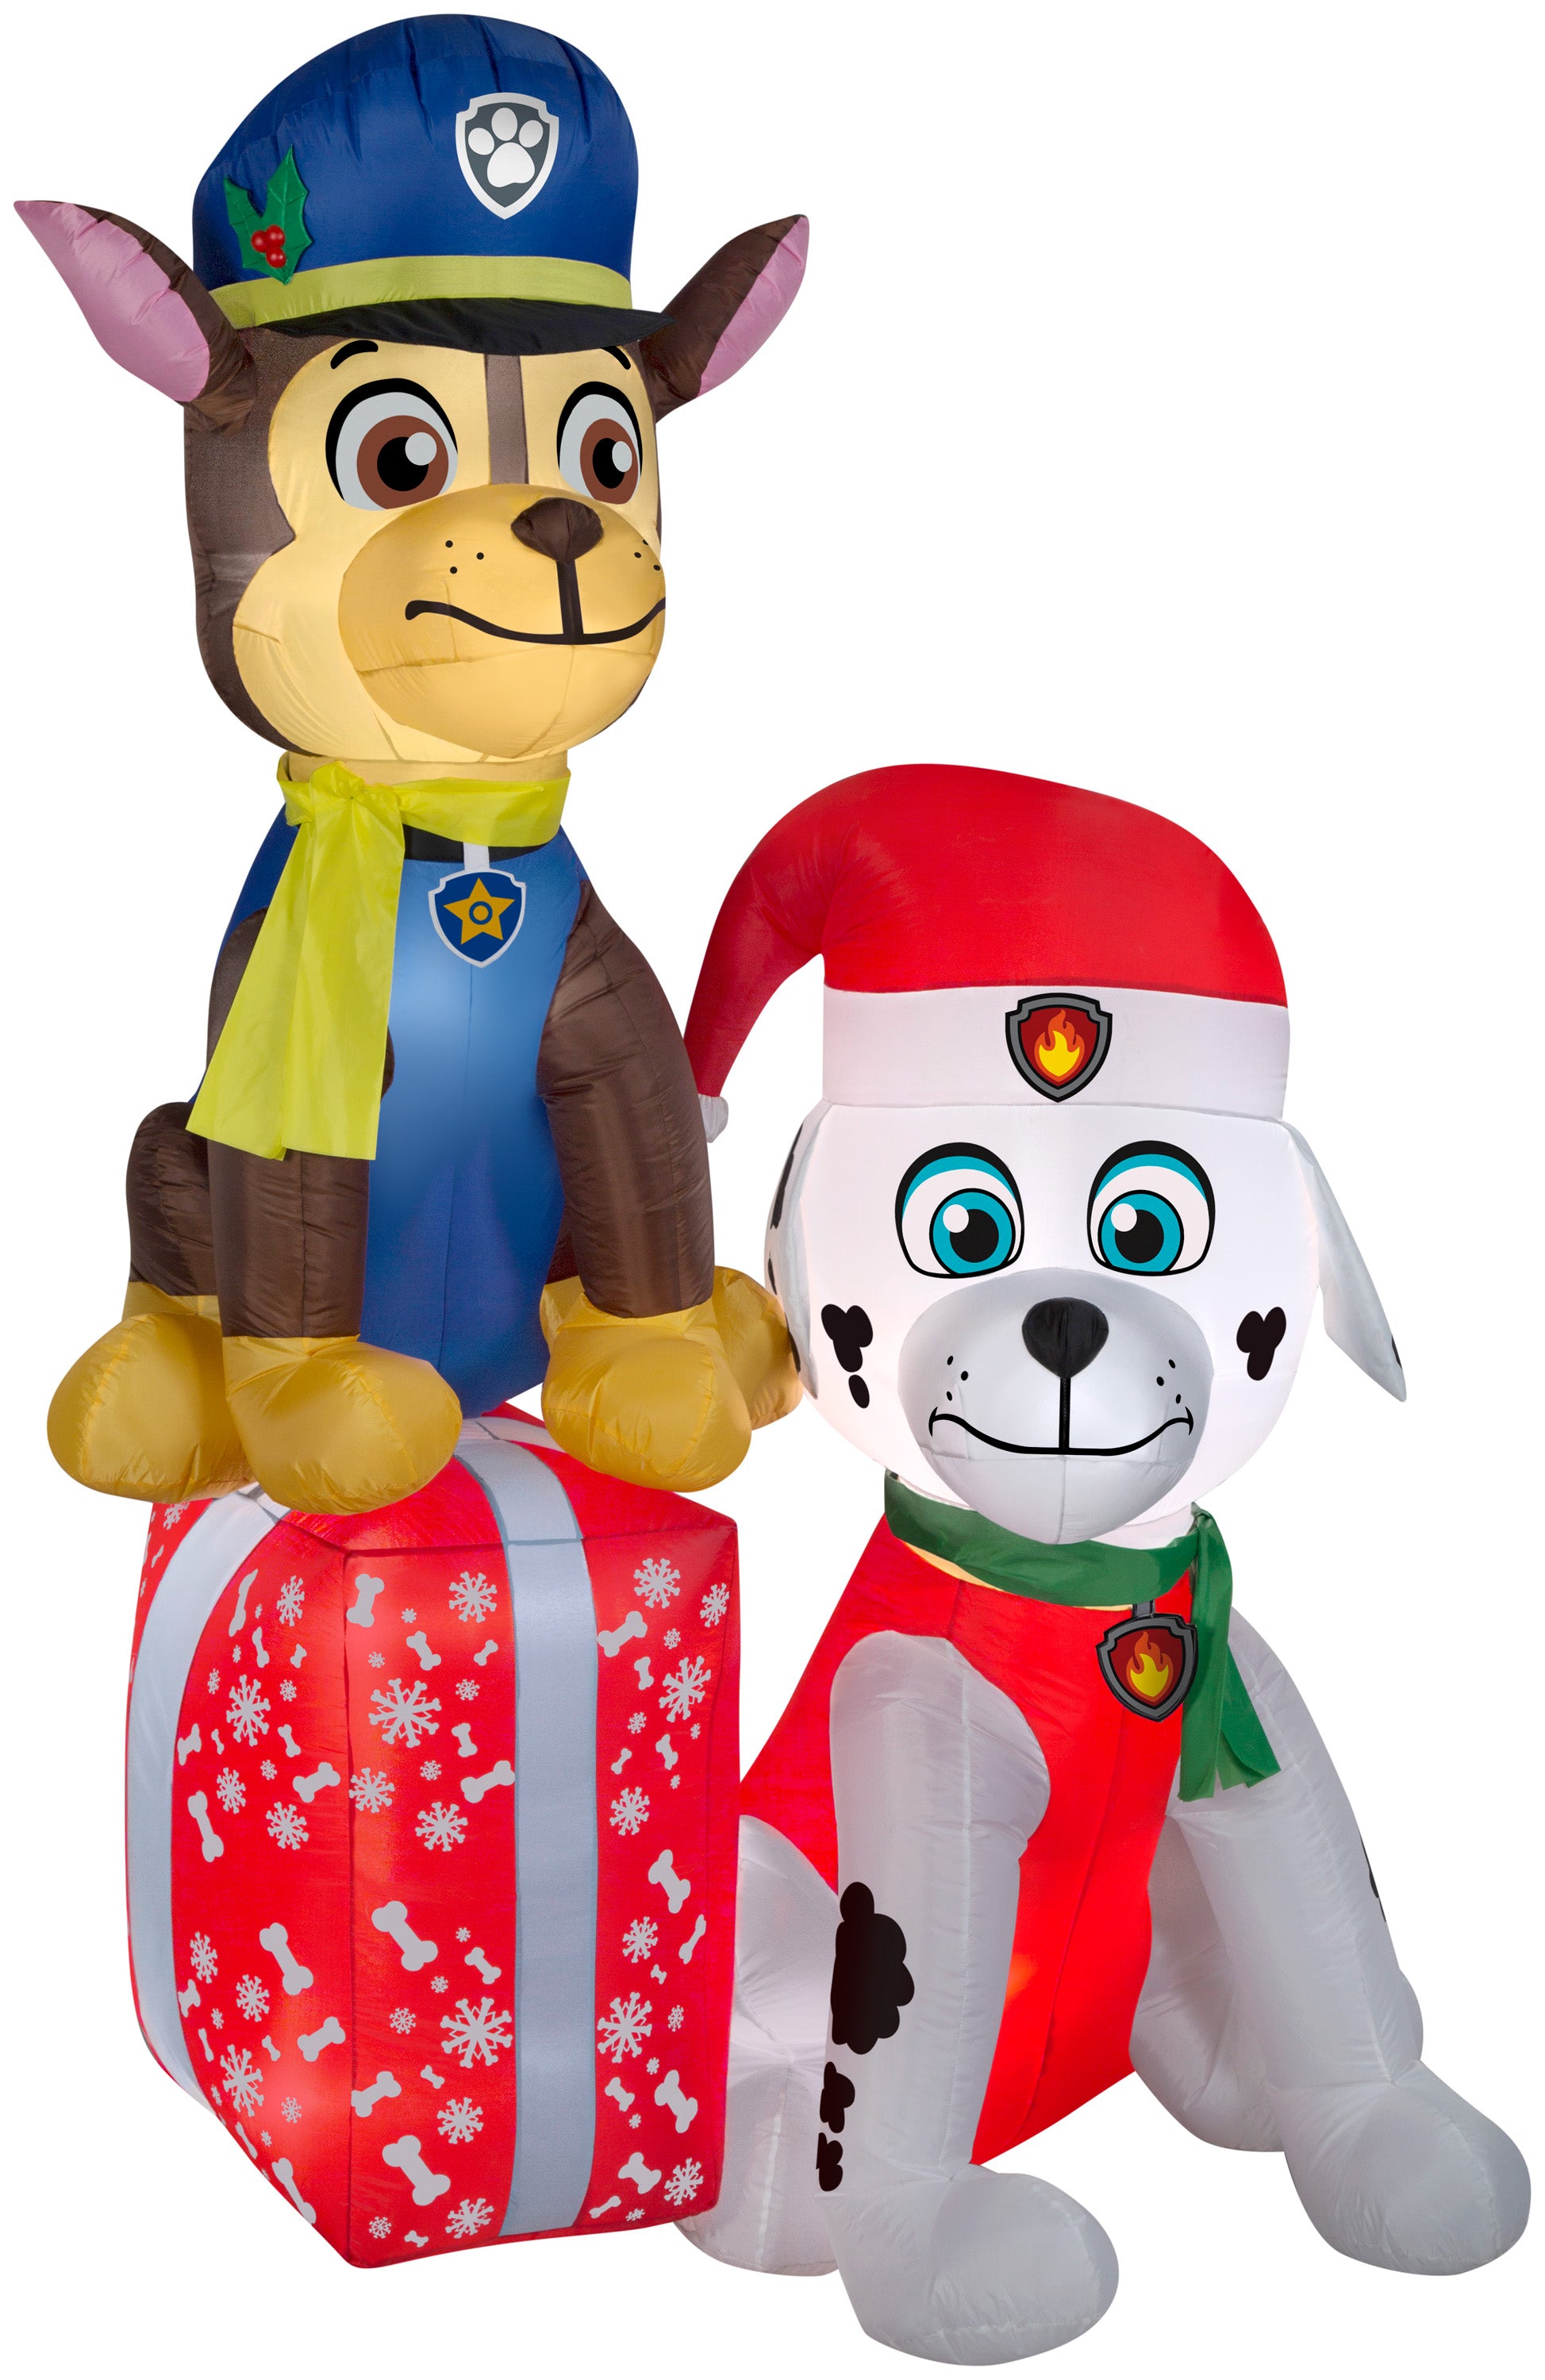 7' Airblown Paw Patrol Nick on Presents Christmas Inflatable